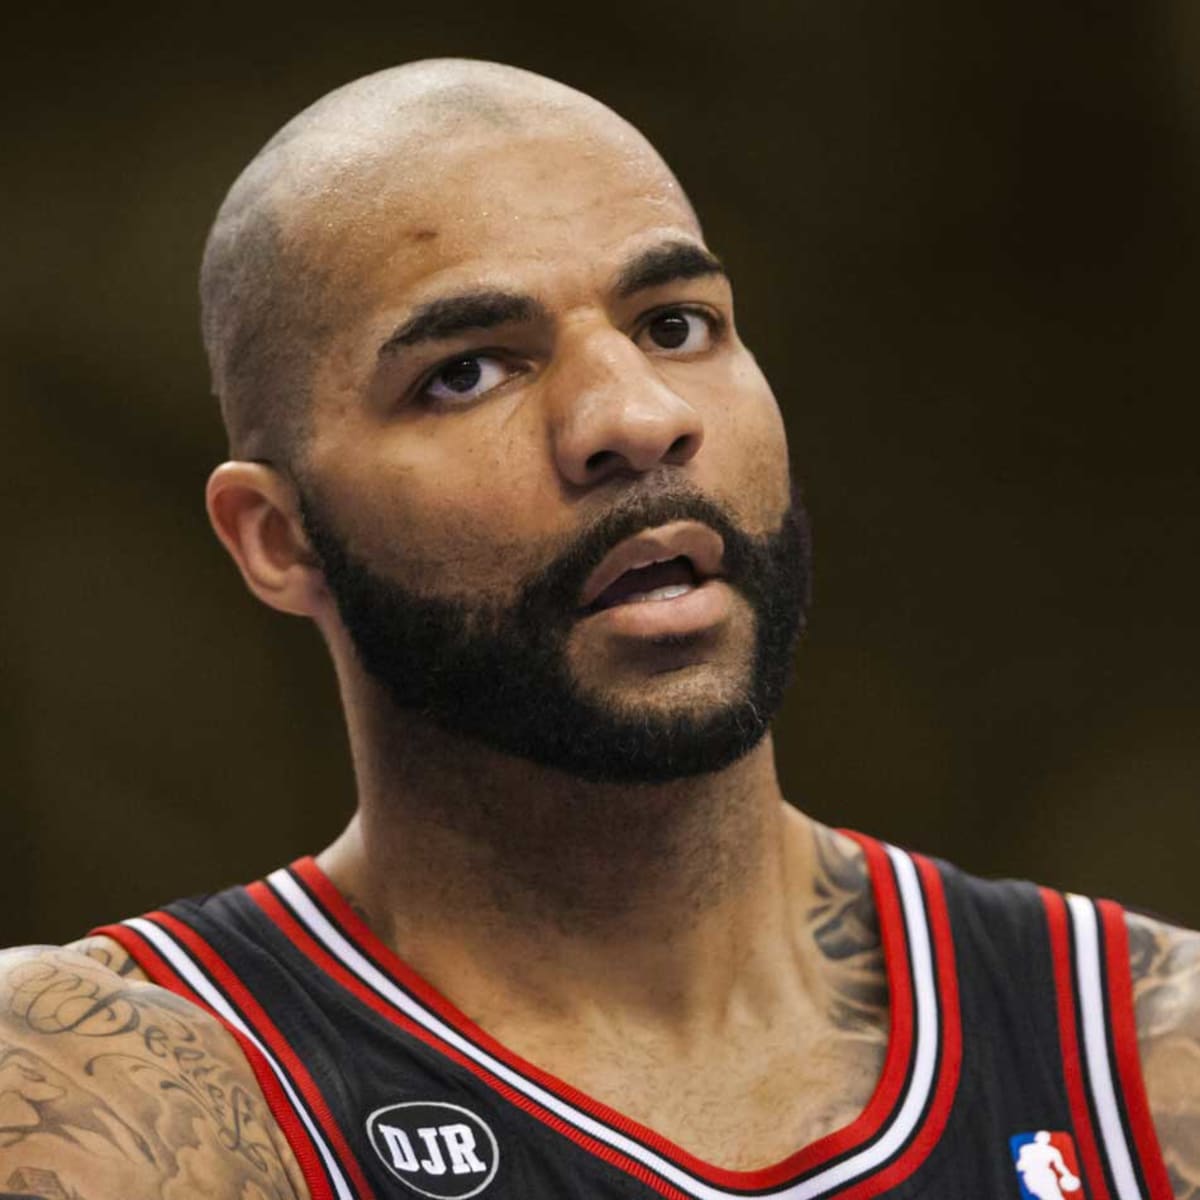 Former NBA Star Carlos Boozer and his family. Have a look!